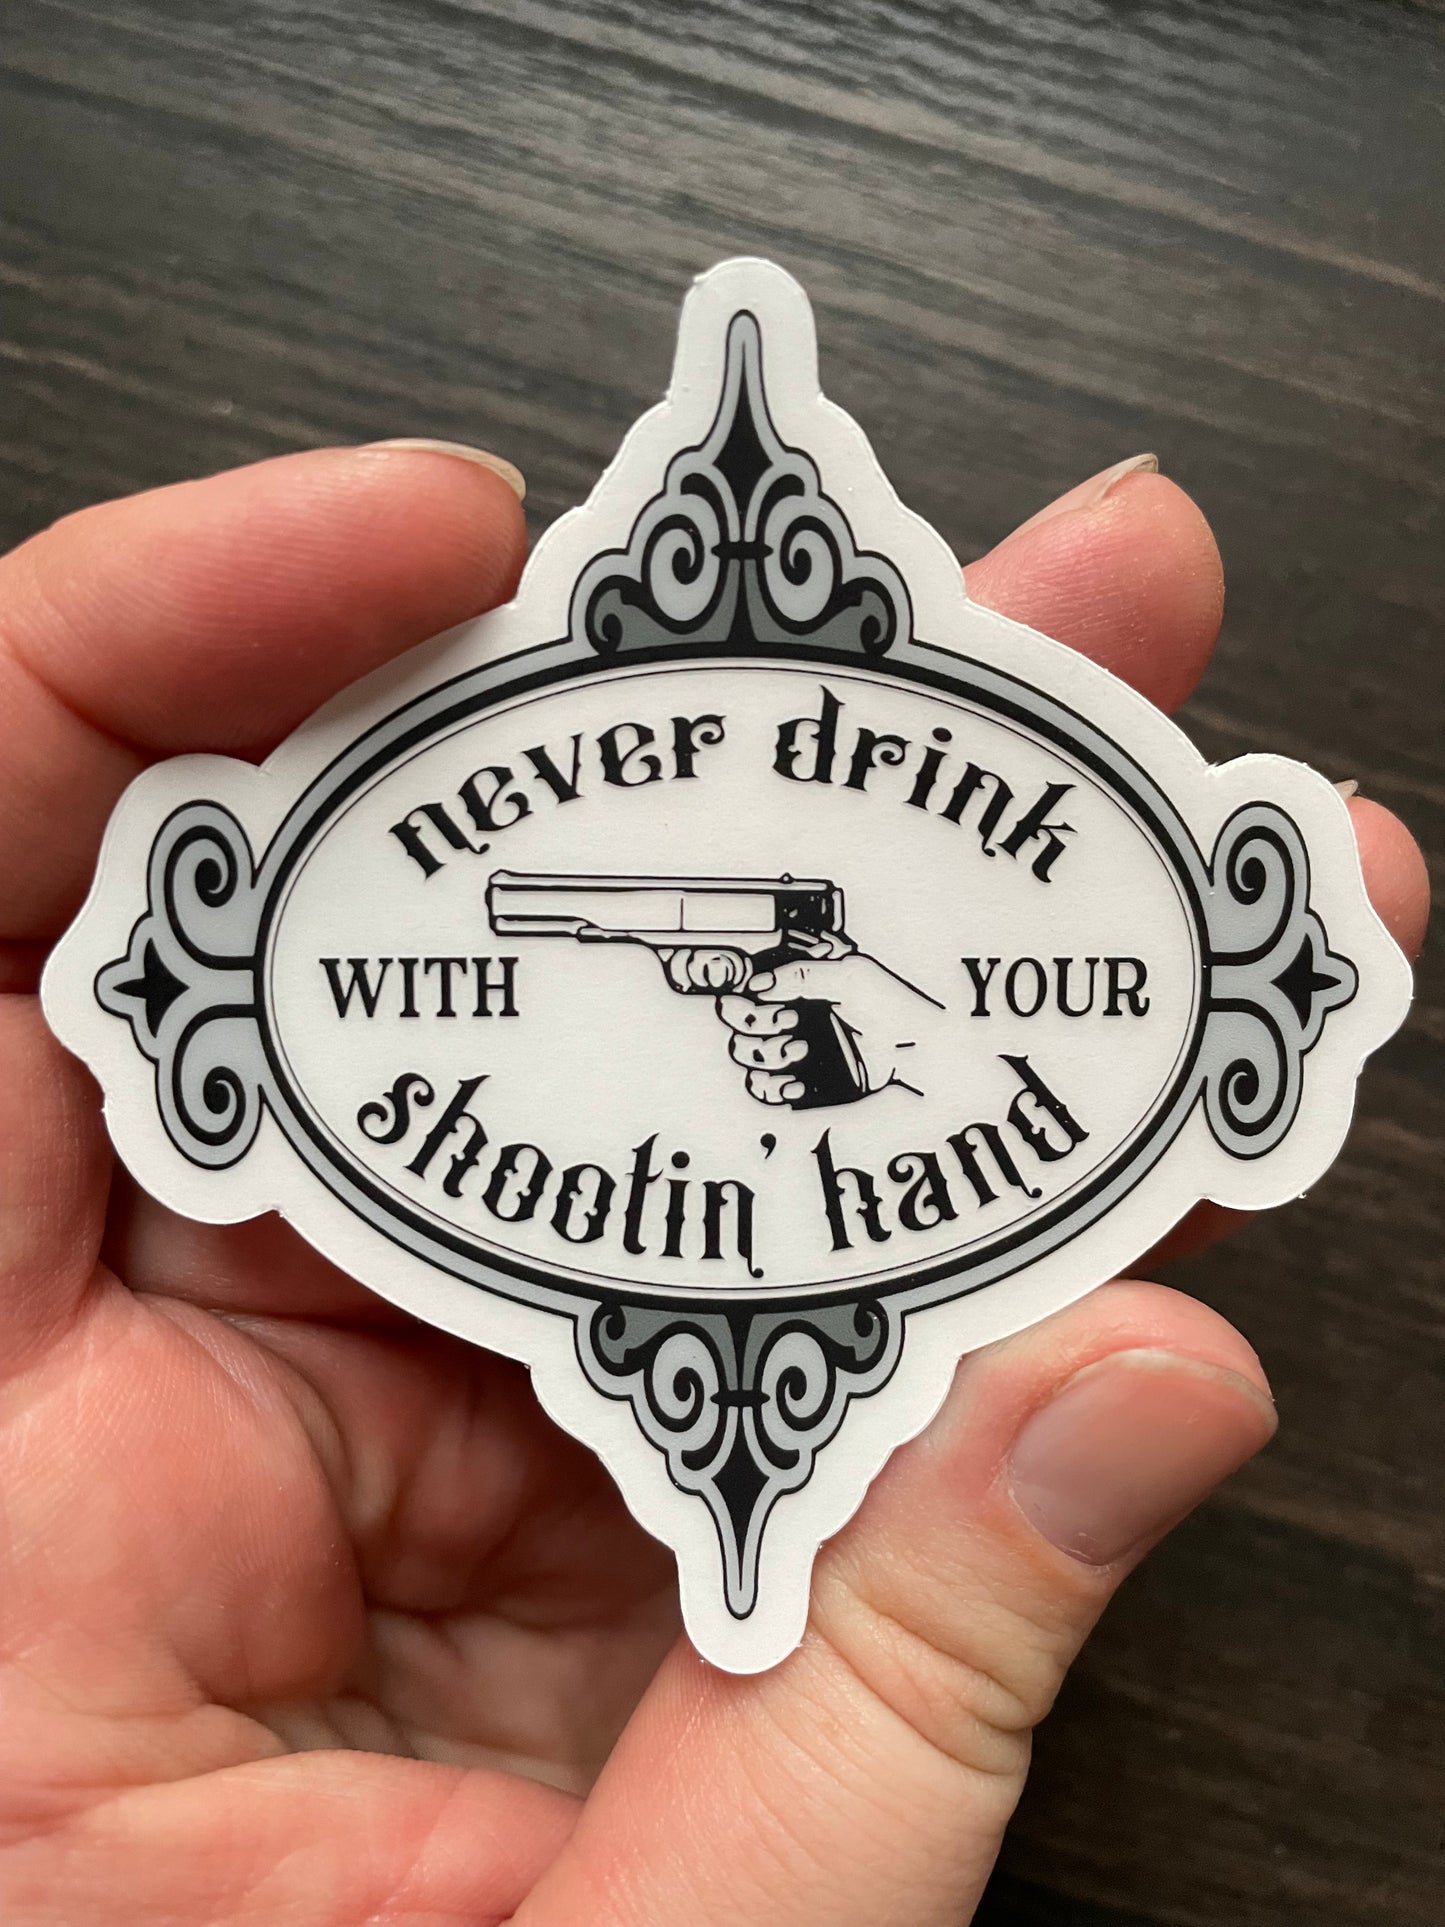 Never Drink With Your Shootin’ Hand Clear Vinyl Sticker